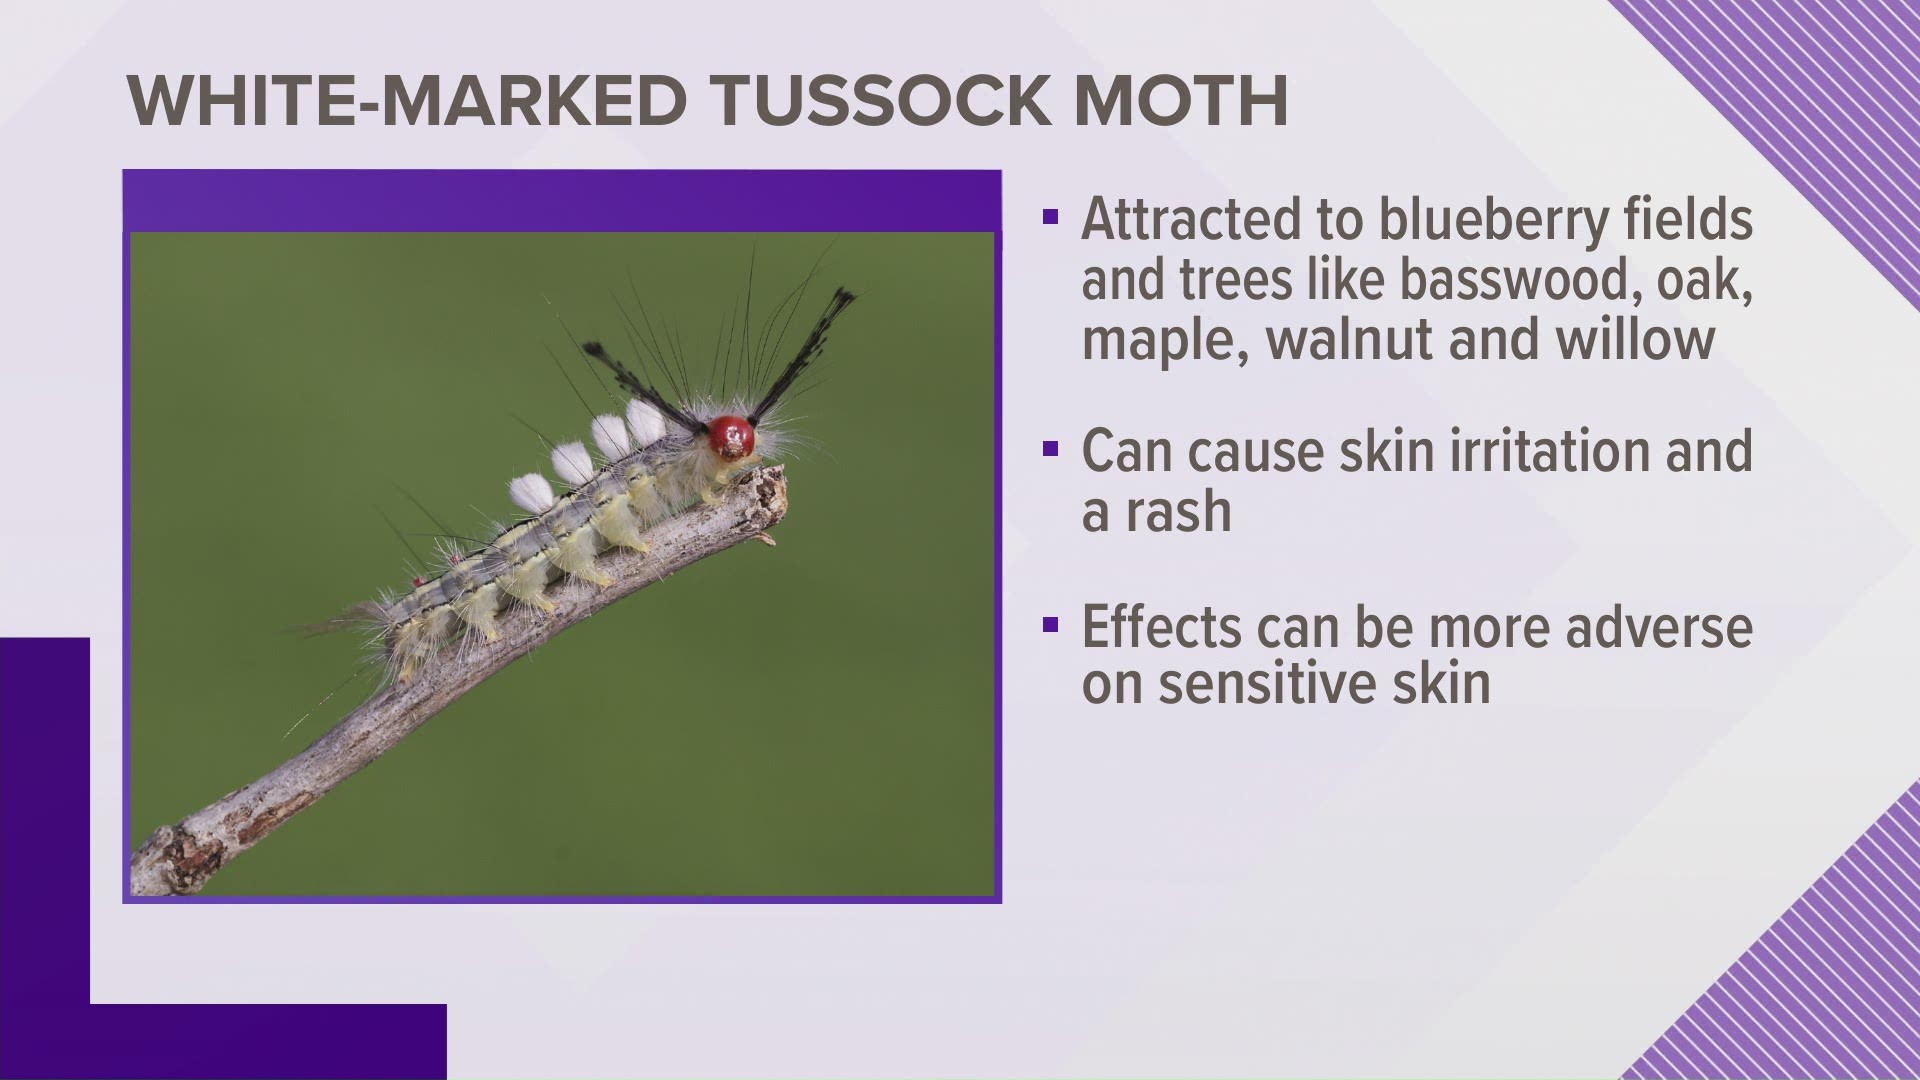 Michigan residents have an insect to watch out for in blueberry fields and their backyards this summer: the white-marked tussock moth.